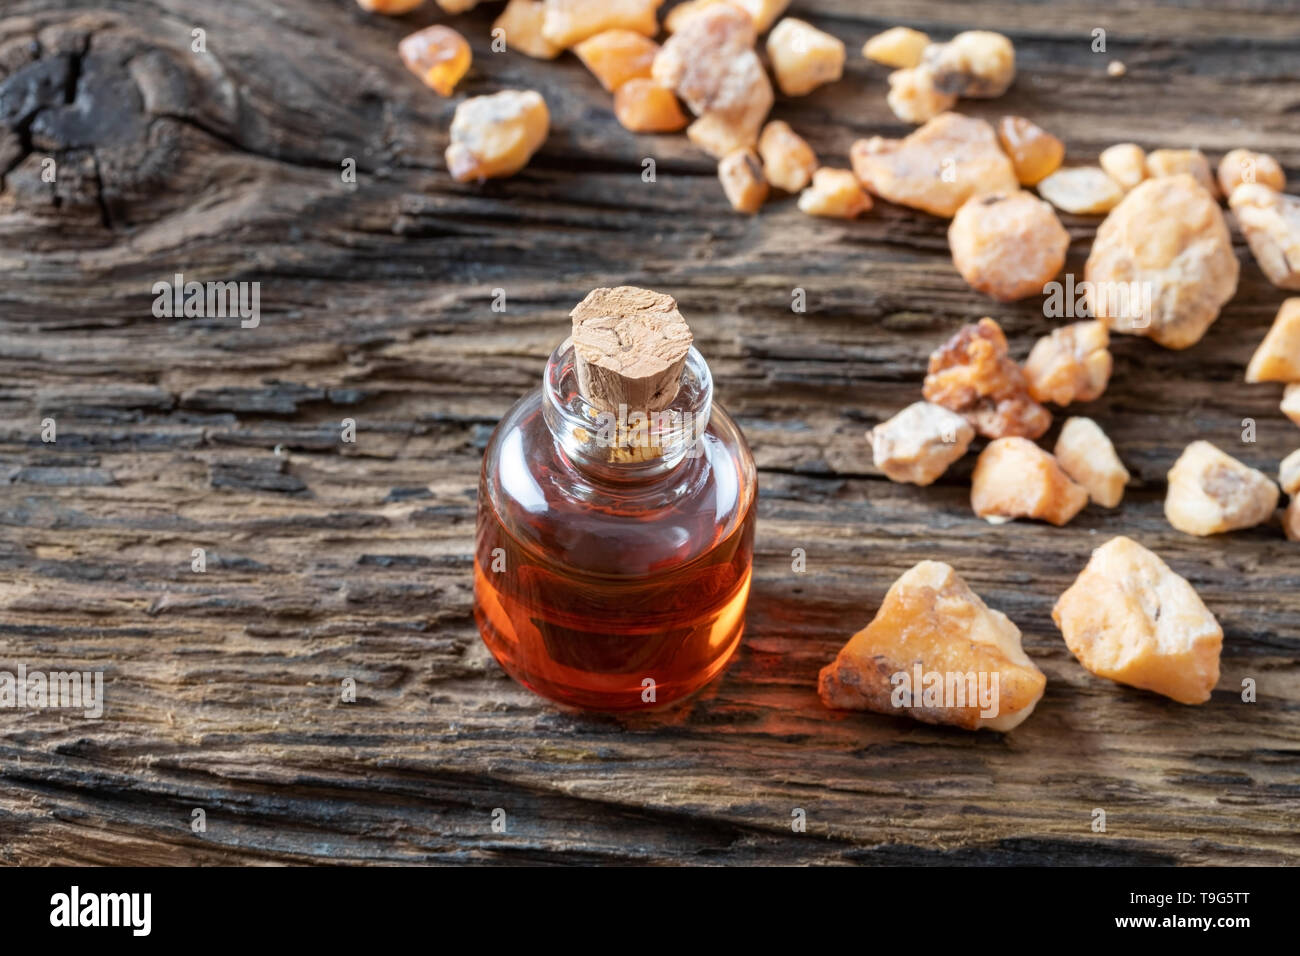 A bottle of styrax benzoin essential oil and resin Stock Photo